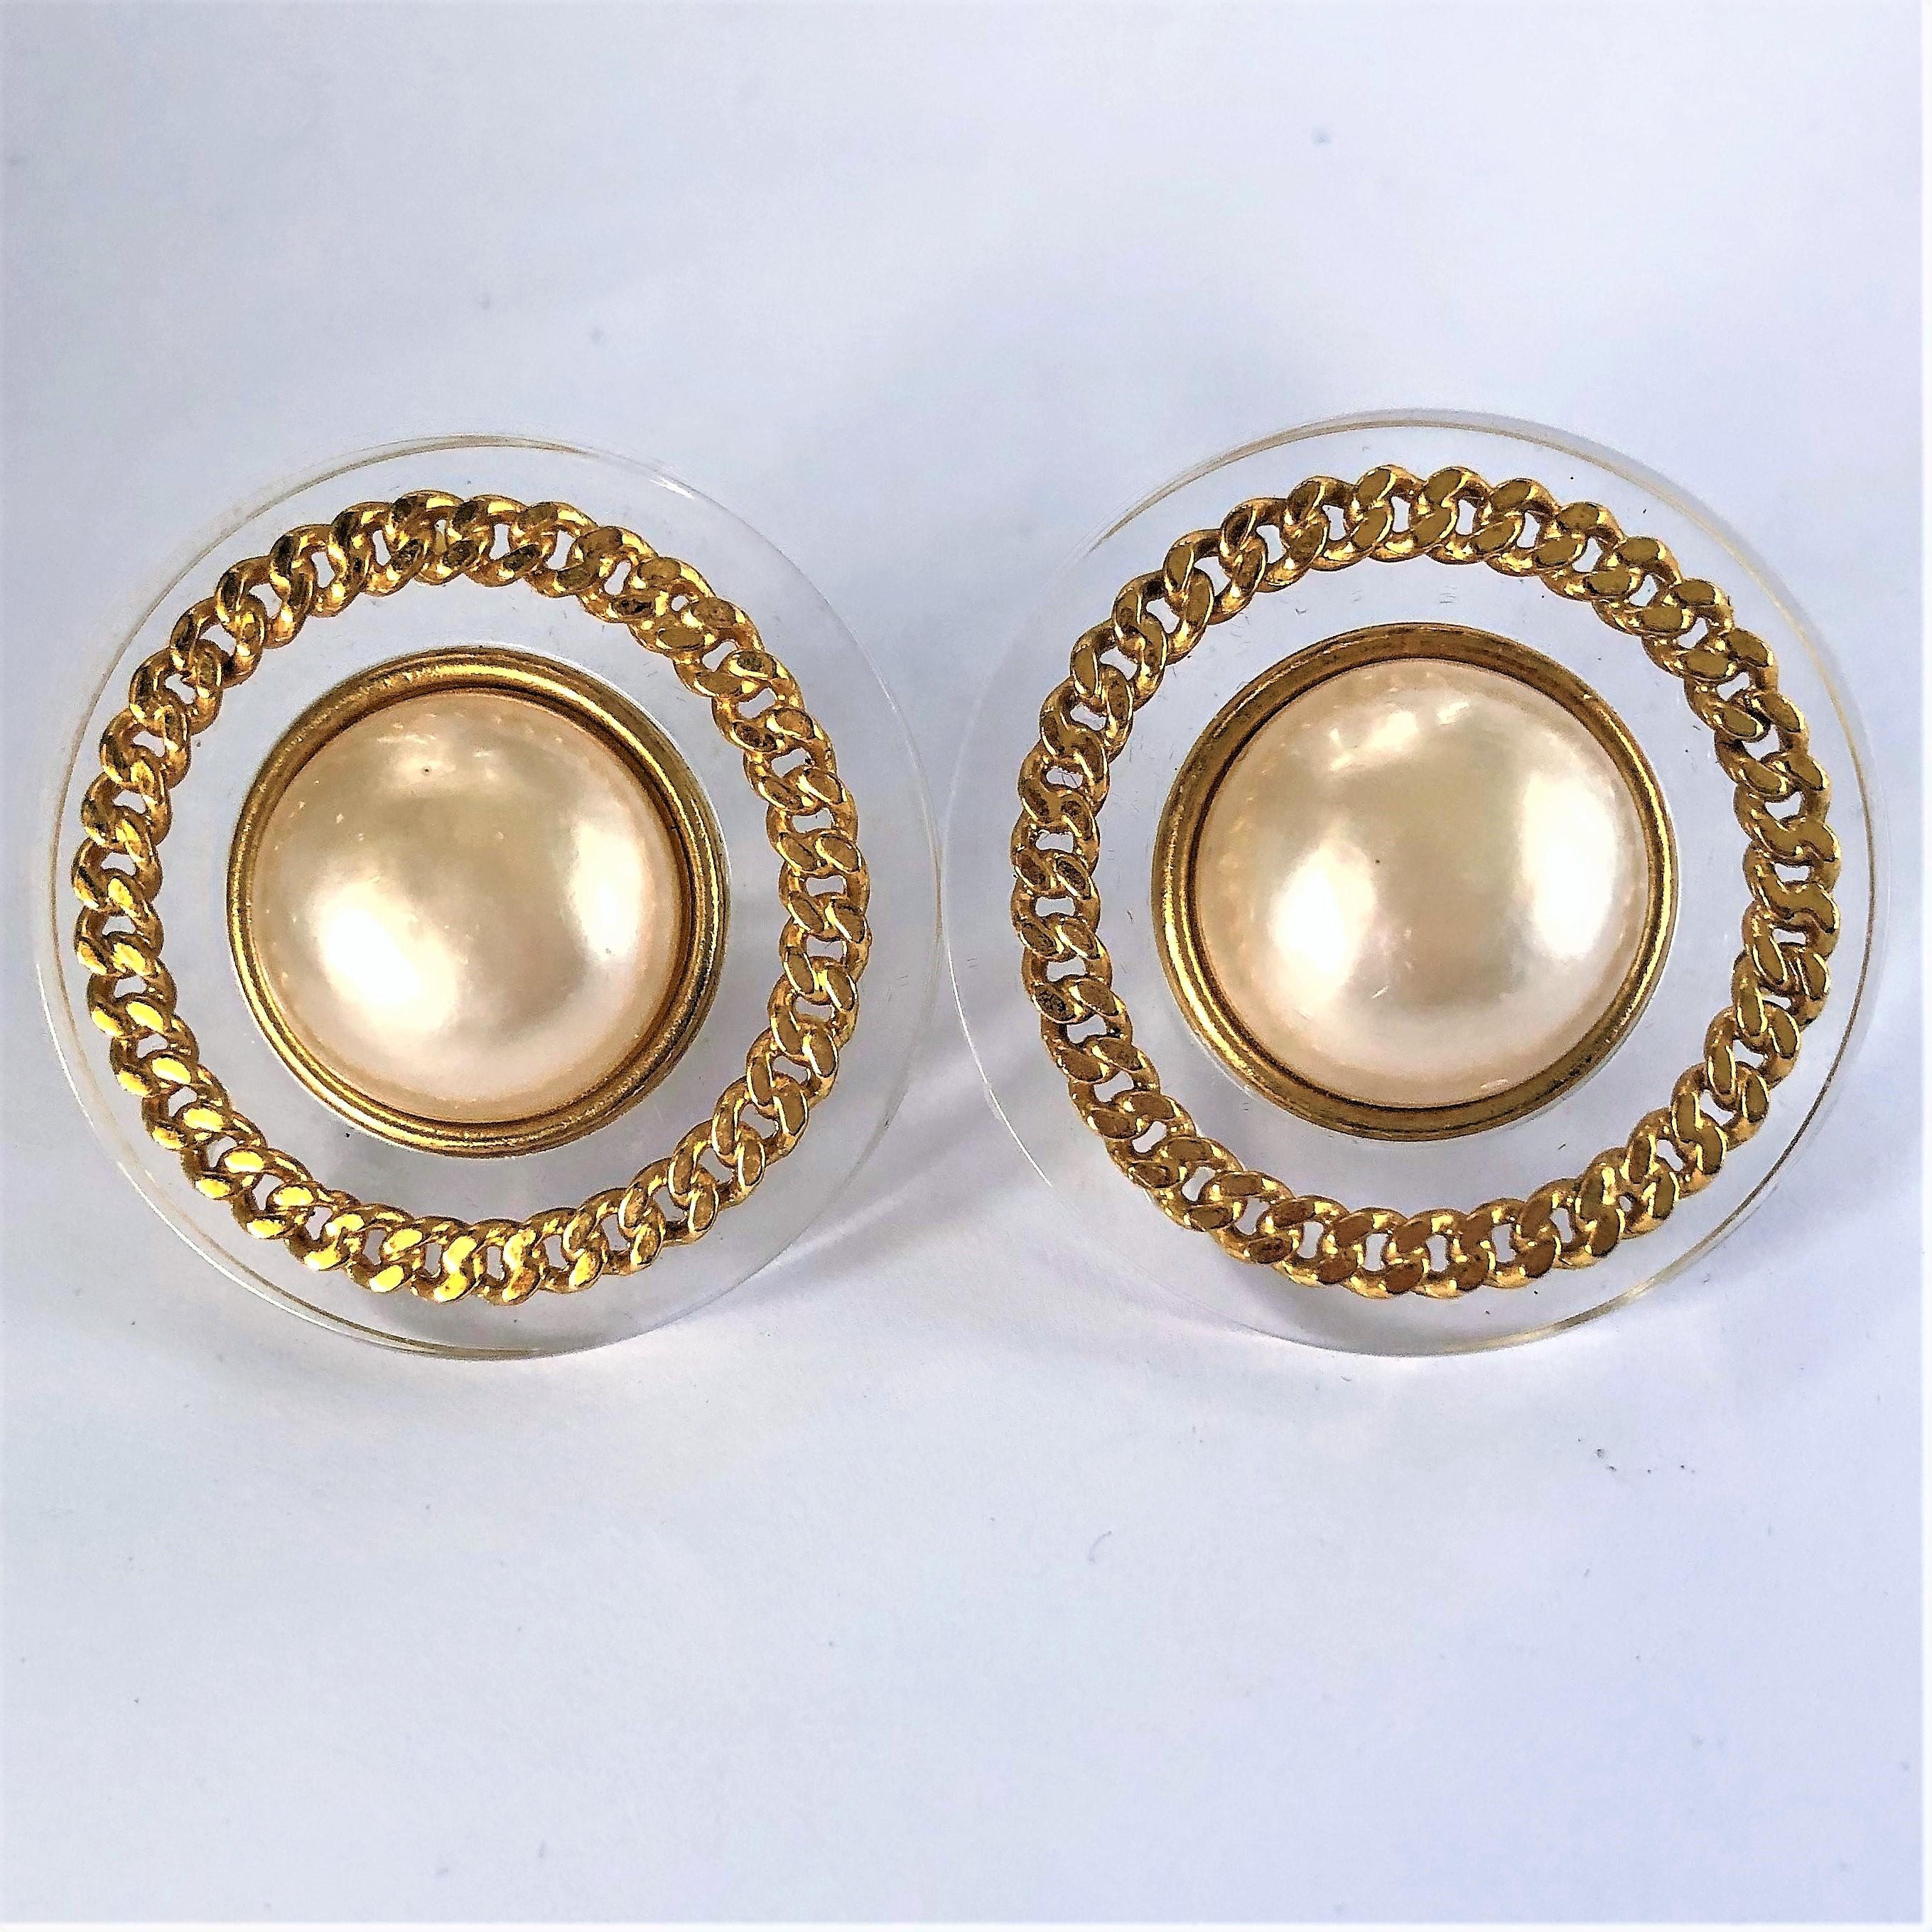 Vintage Fashion Jewelry Faux Pearl Black & Clear Accents Gold Tone Post Earrings 